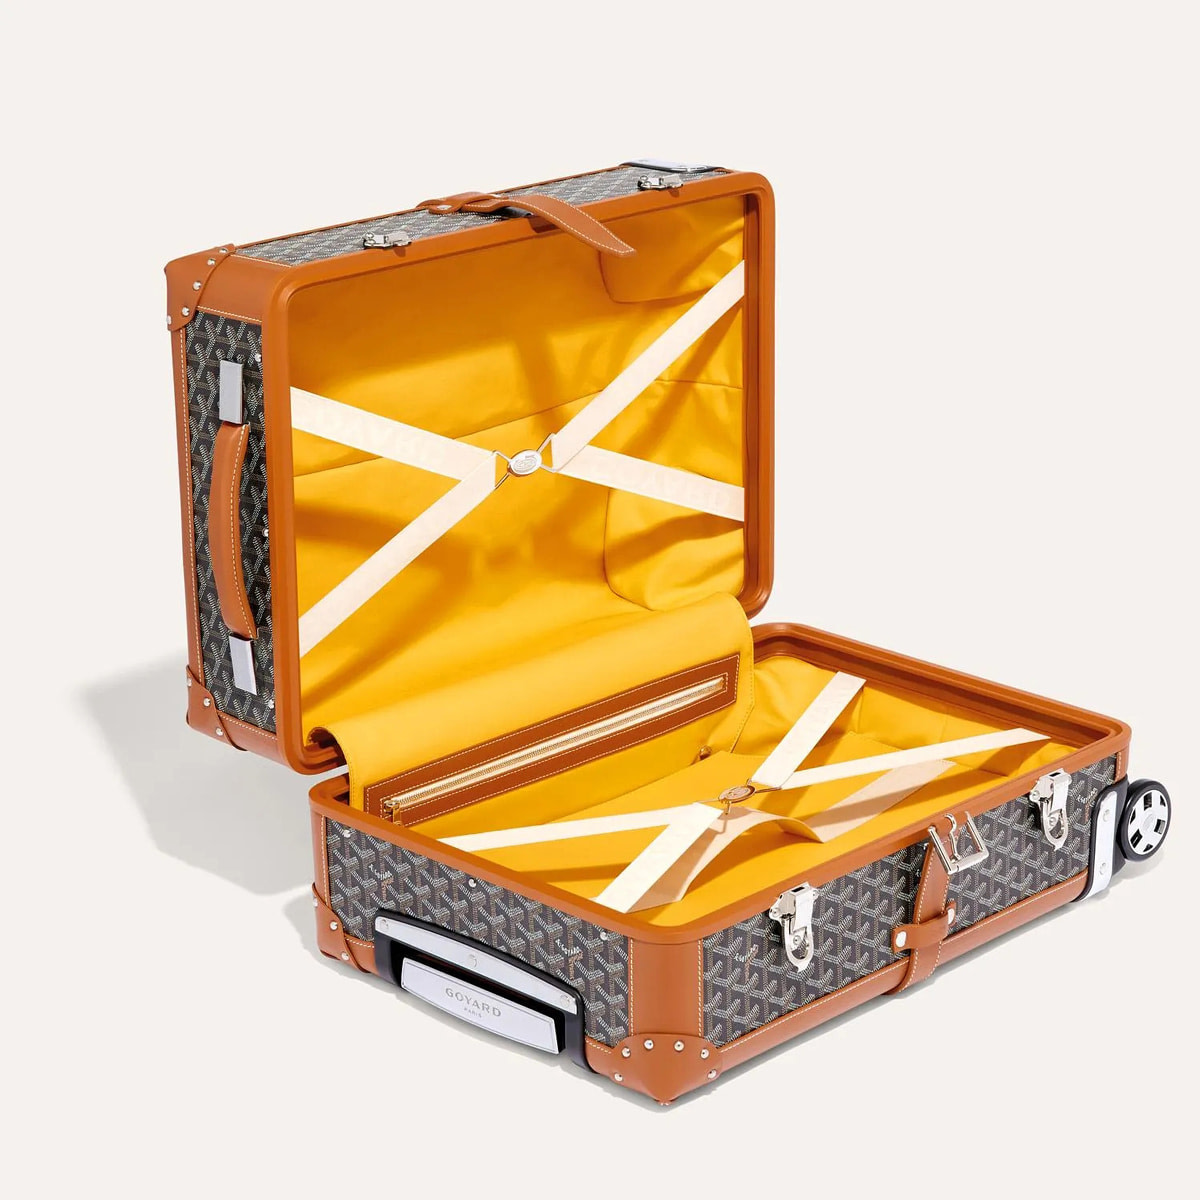 The ultimate piece of luxury luggage